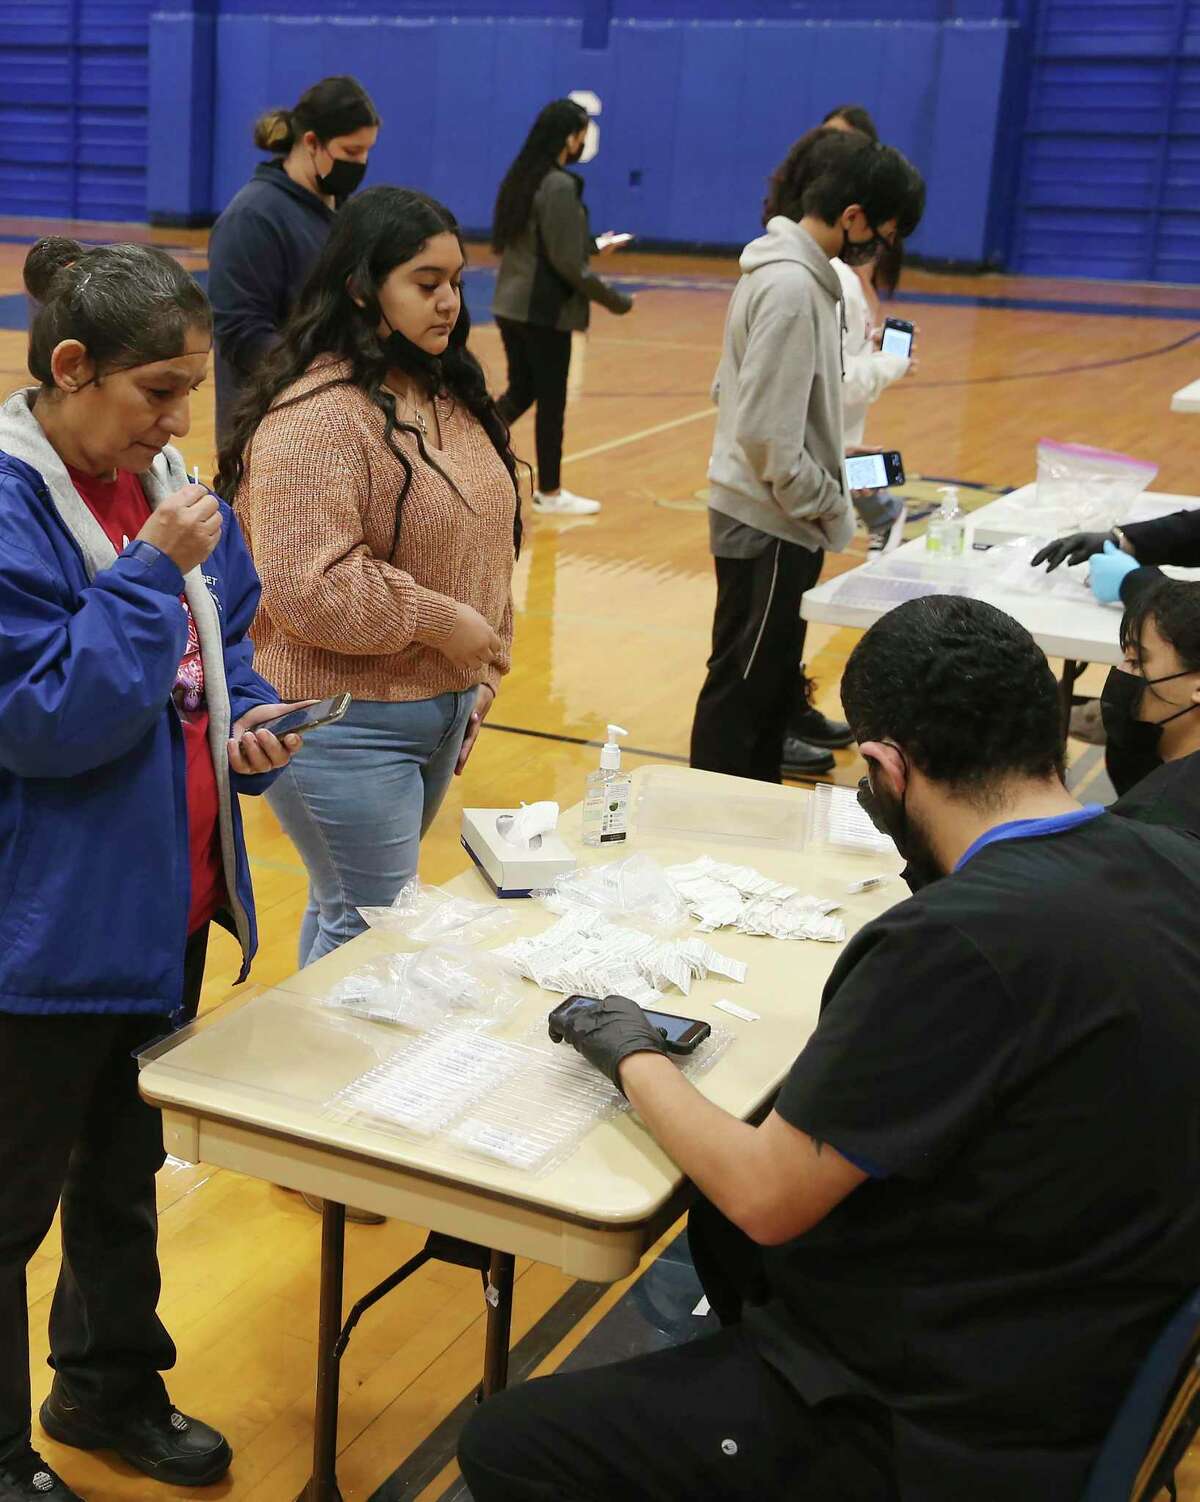 Somerset High School students and staff get their weekly COVID-19 testing at the school’s gym, Monday, Feb. 14, 2022. They are offered a weekly test on a voluntary basis.